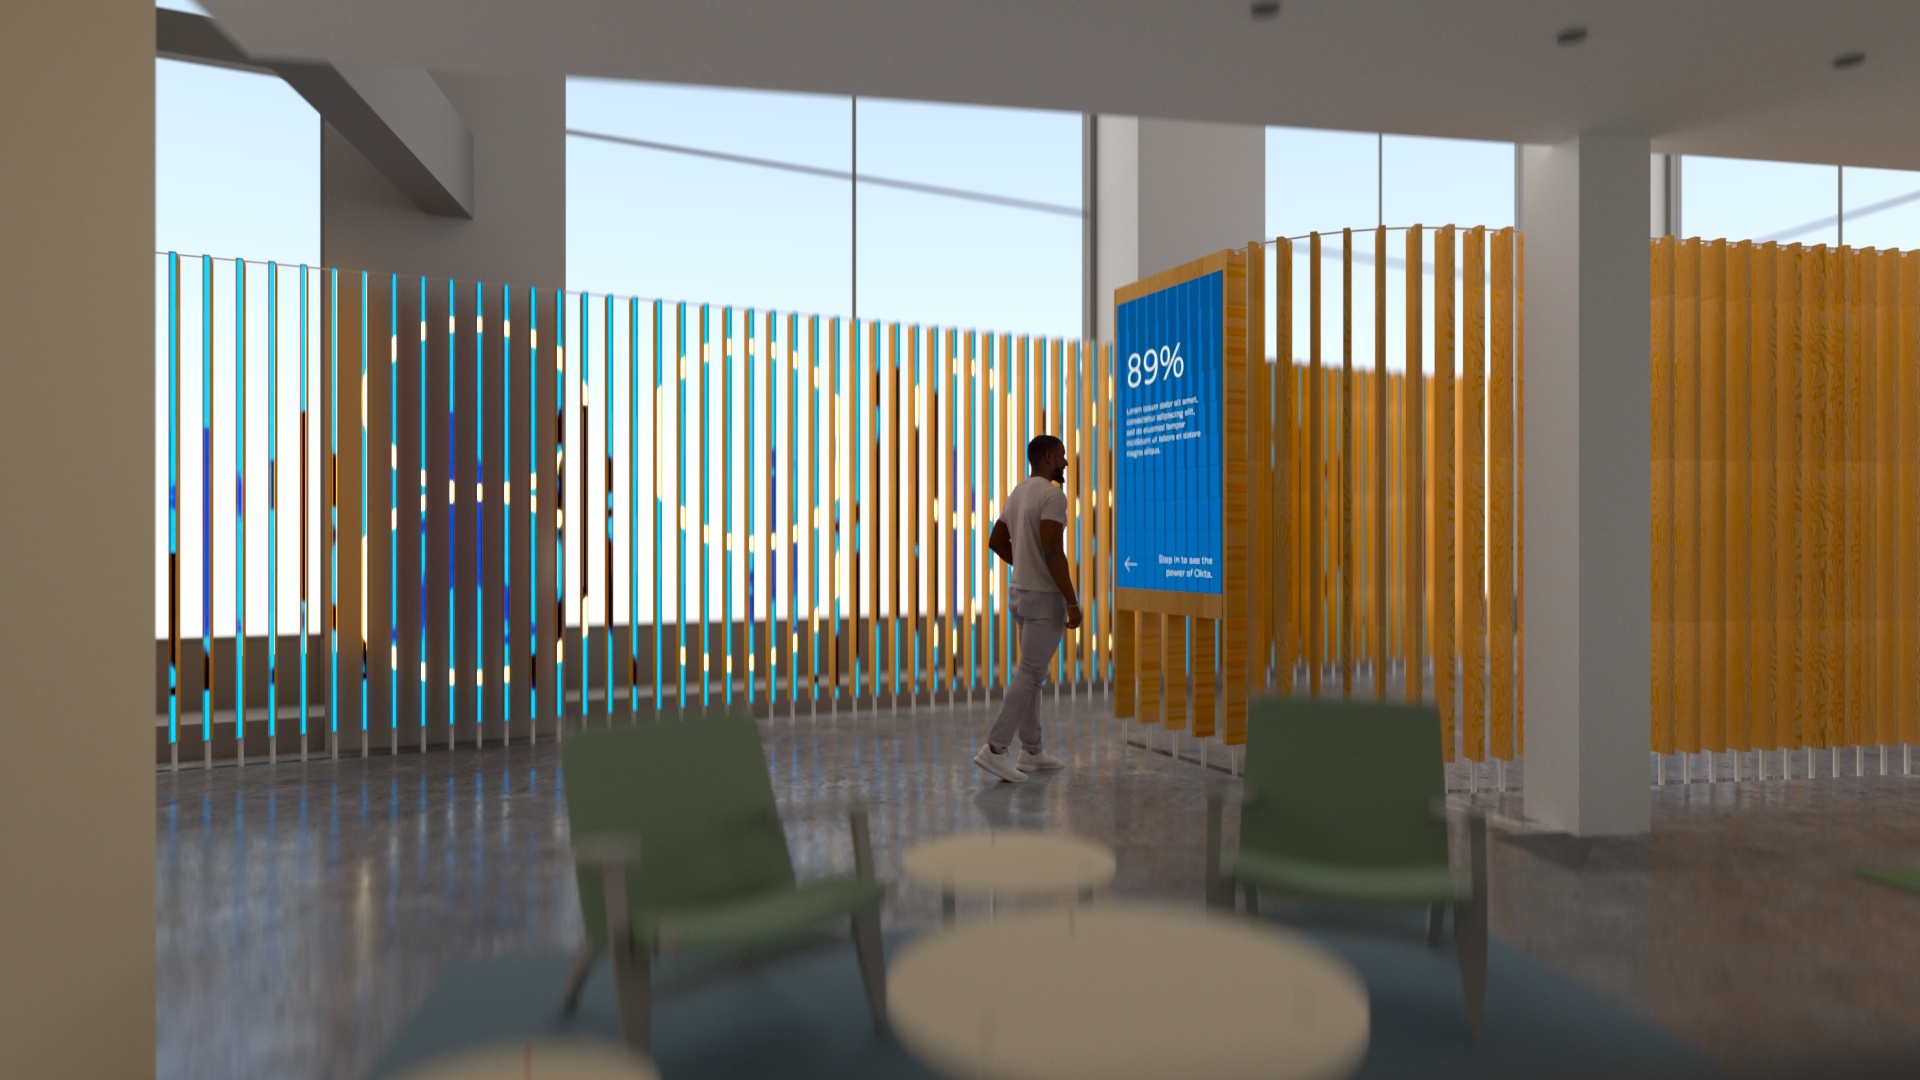 Render of man looking at an active screen on the installation while the vertical LED fins display the number "89%" on the far wall